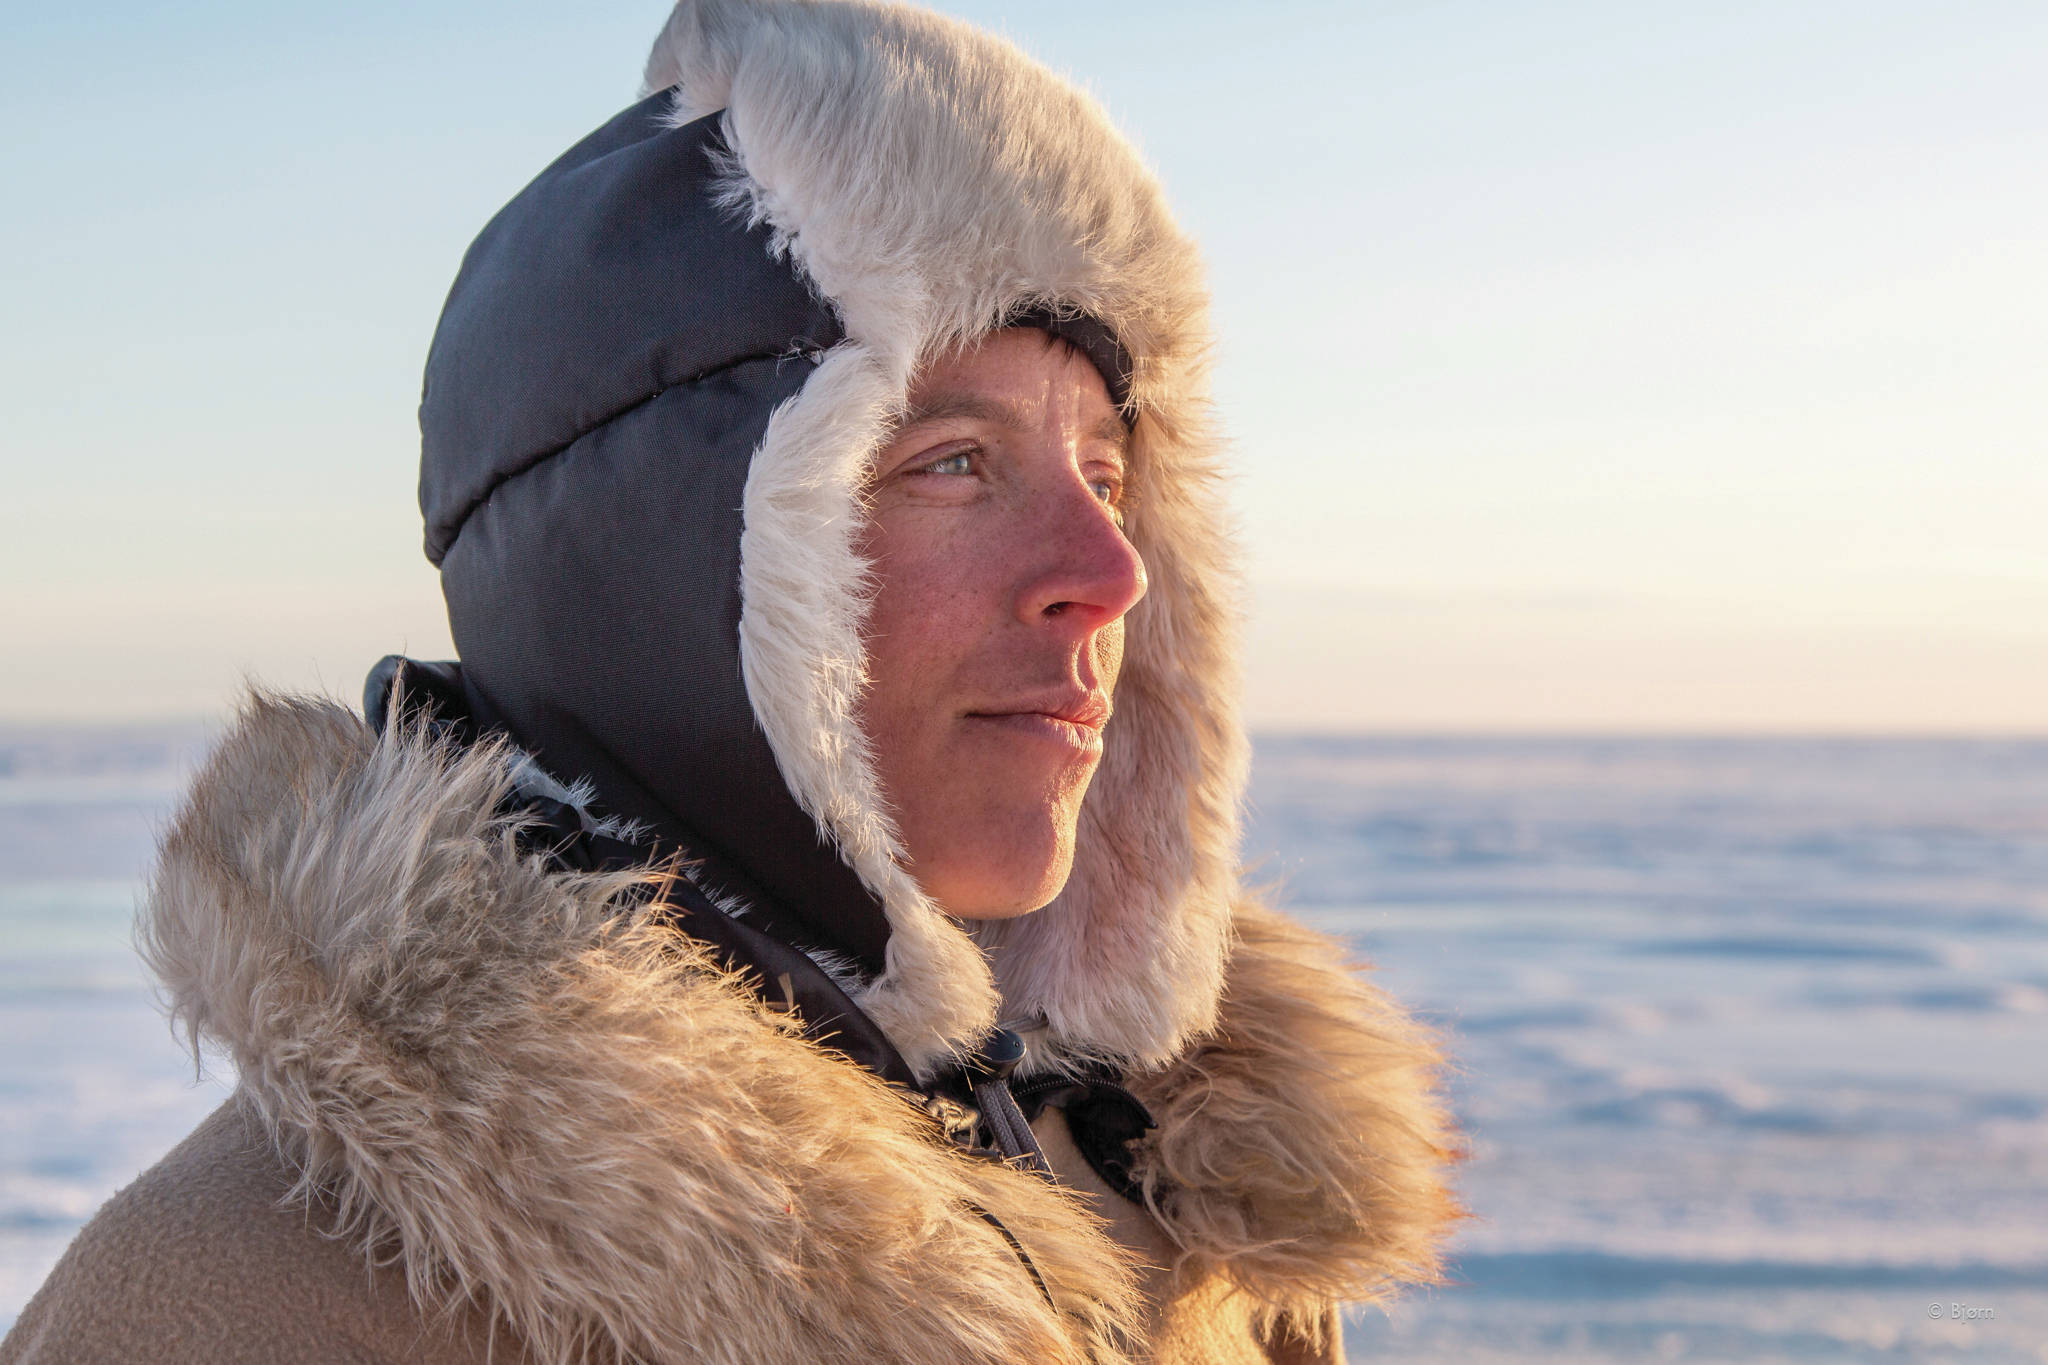 Kim McNett in a photo taken in March 2014 on one of her Arctic adventures. (Photo by Bjørn Olson)